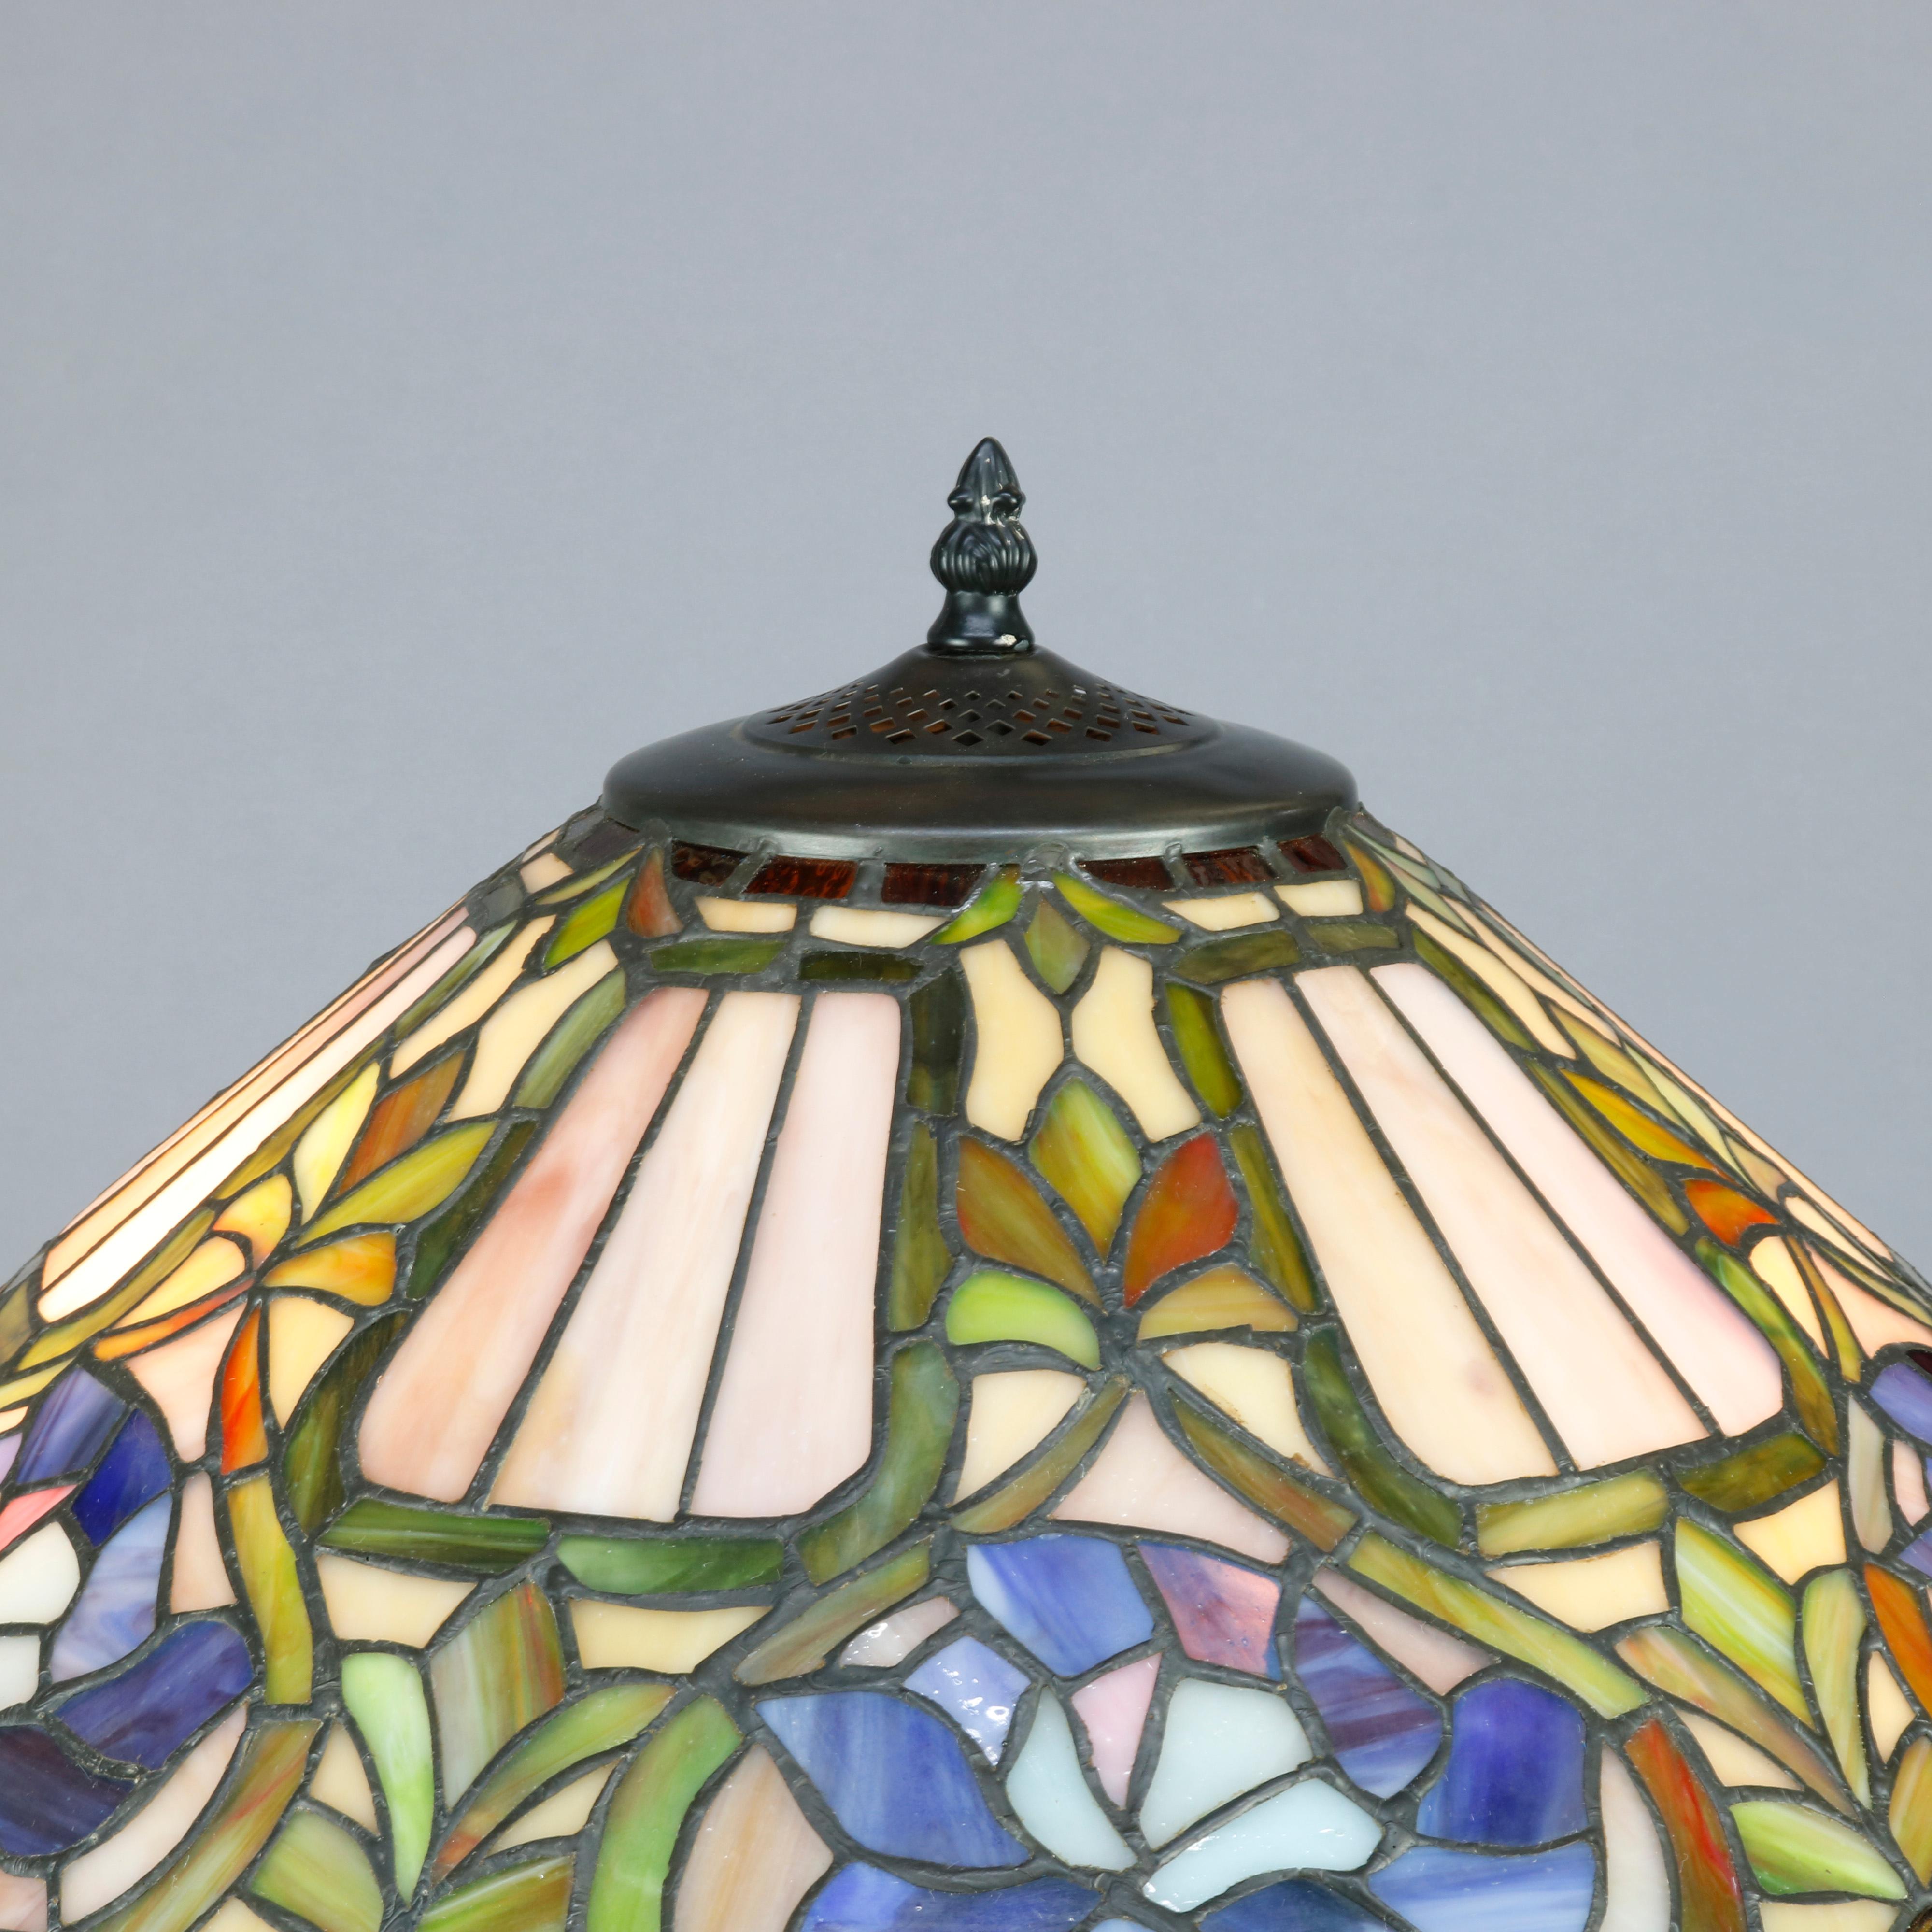 Lead Antique Arts & Crafts Stylized Floral Slag, Stained and Jewel Glass Lamp